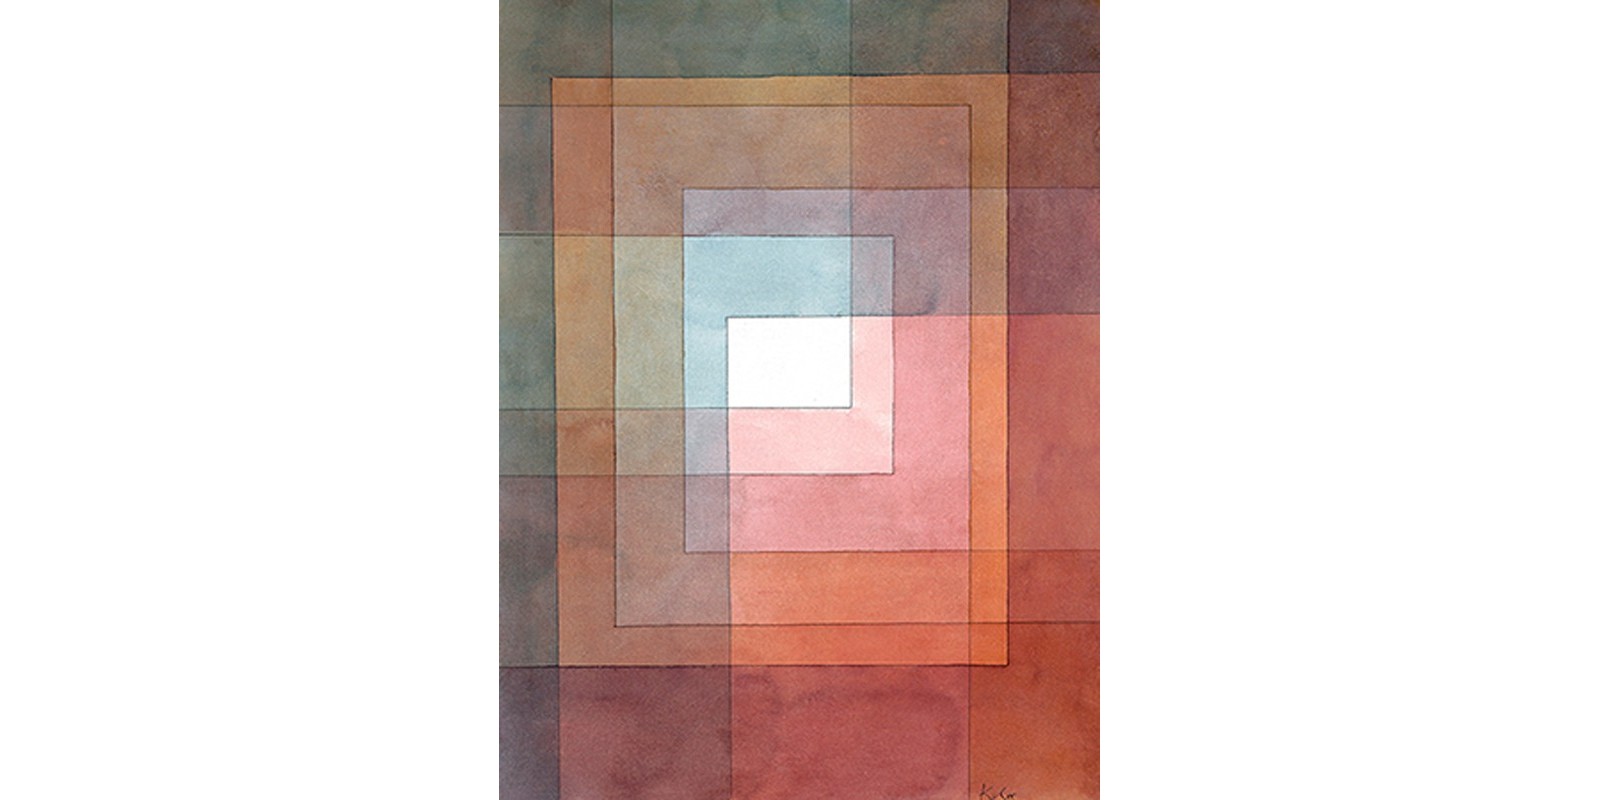 Paul Klee - White Framed Polyphonically